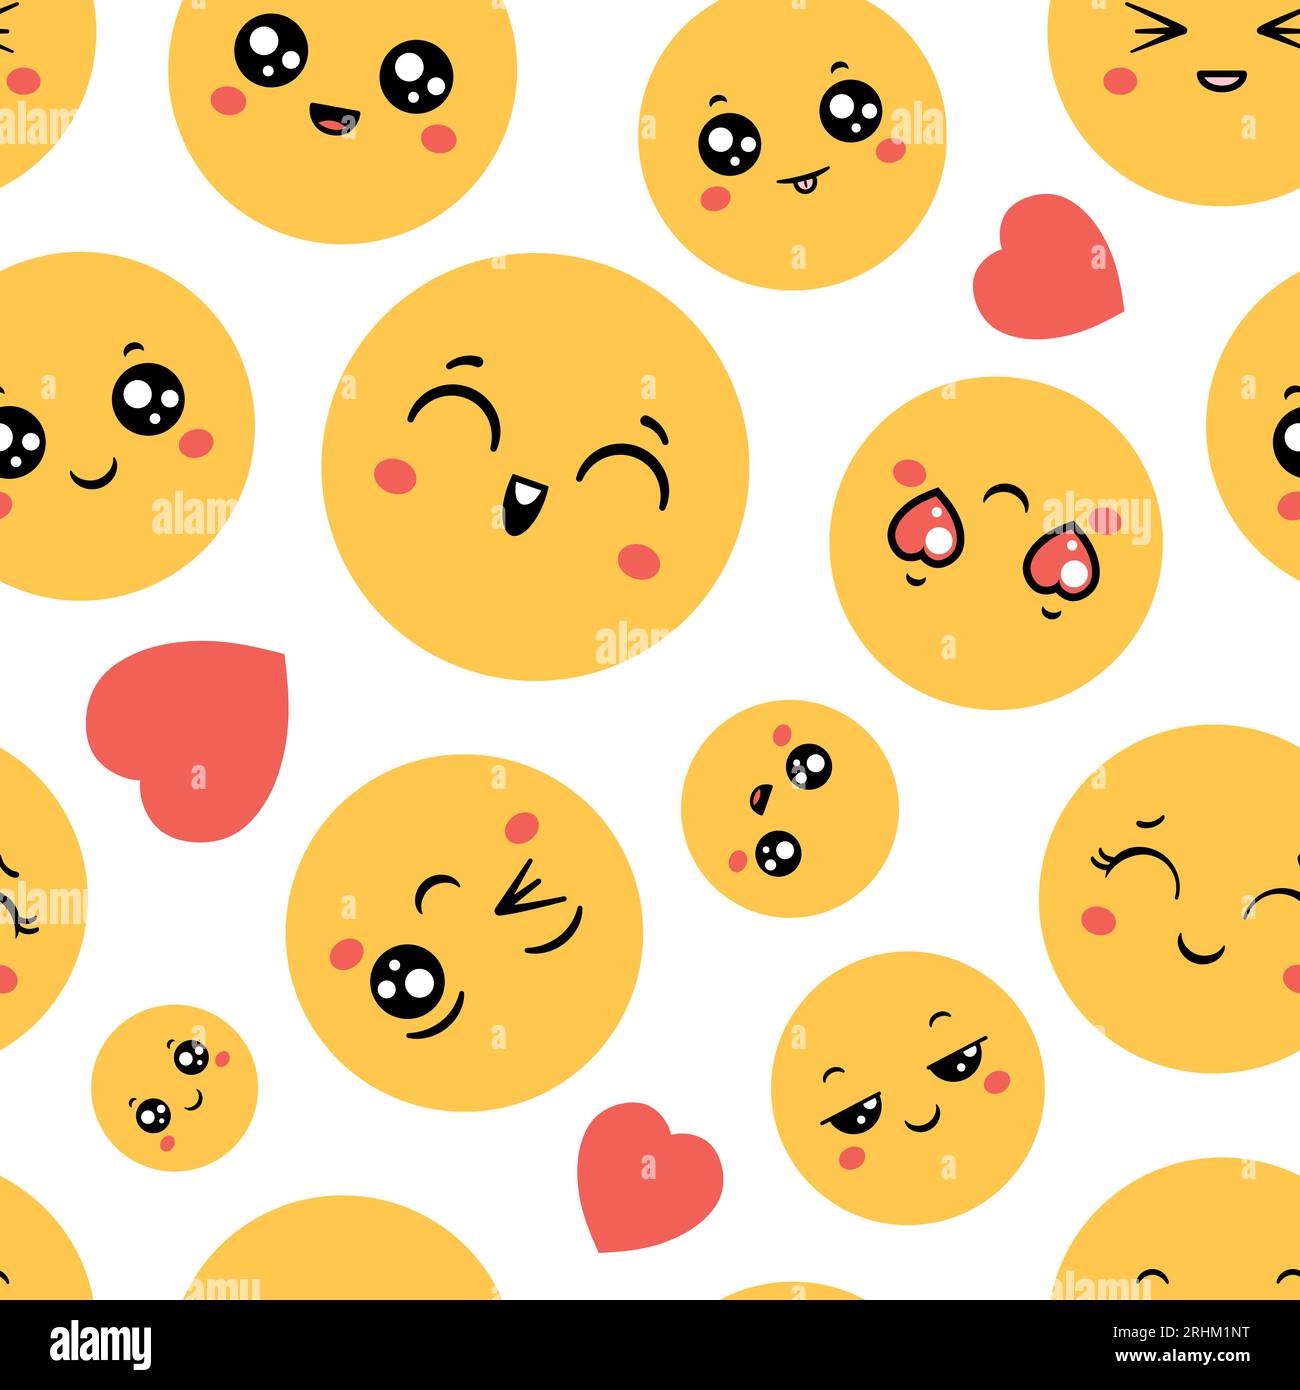 Emoticons Seamless Pattern Emoji Happy Faces For Funny Print